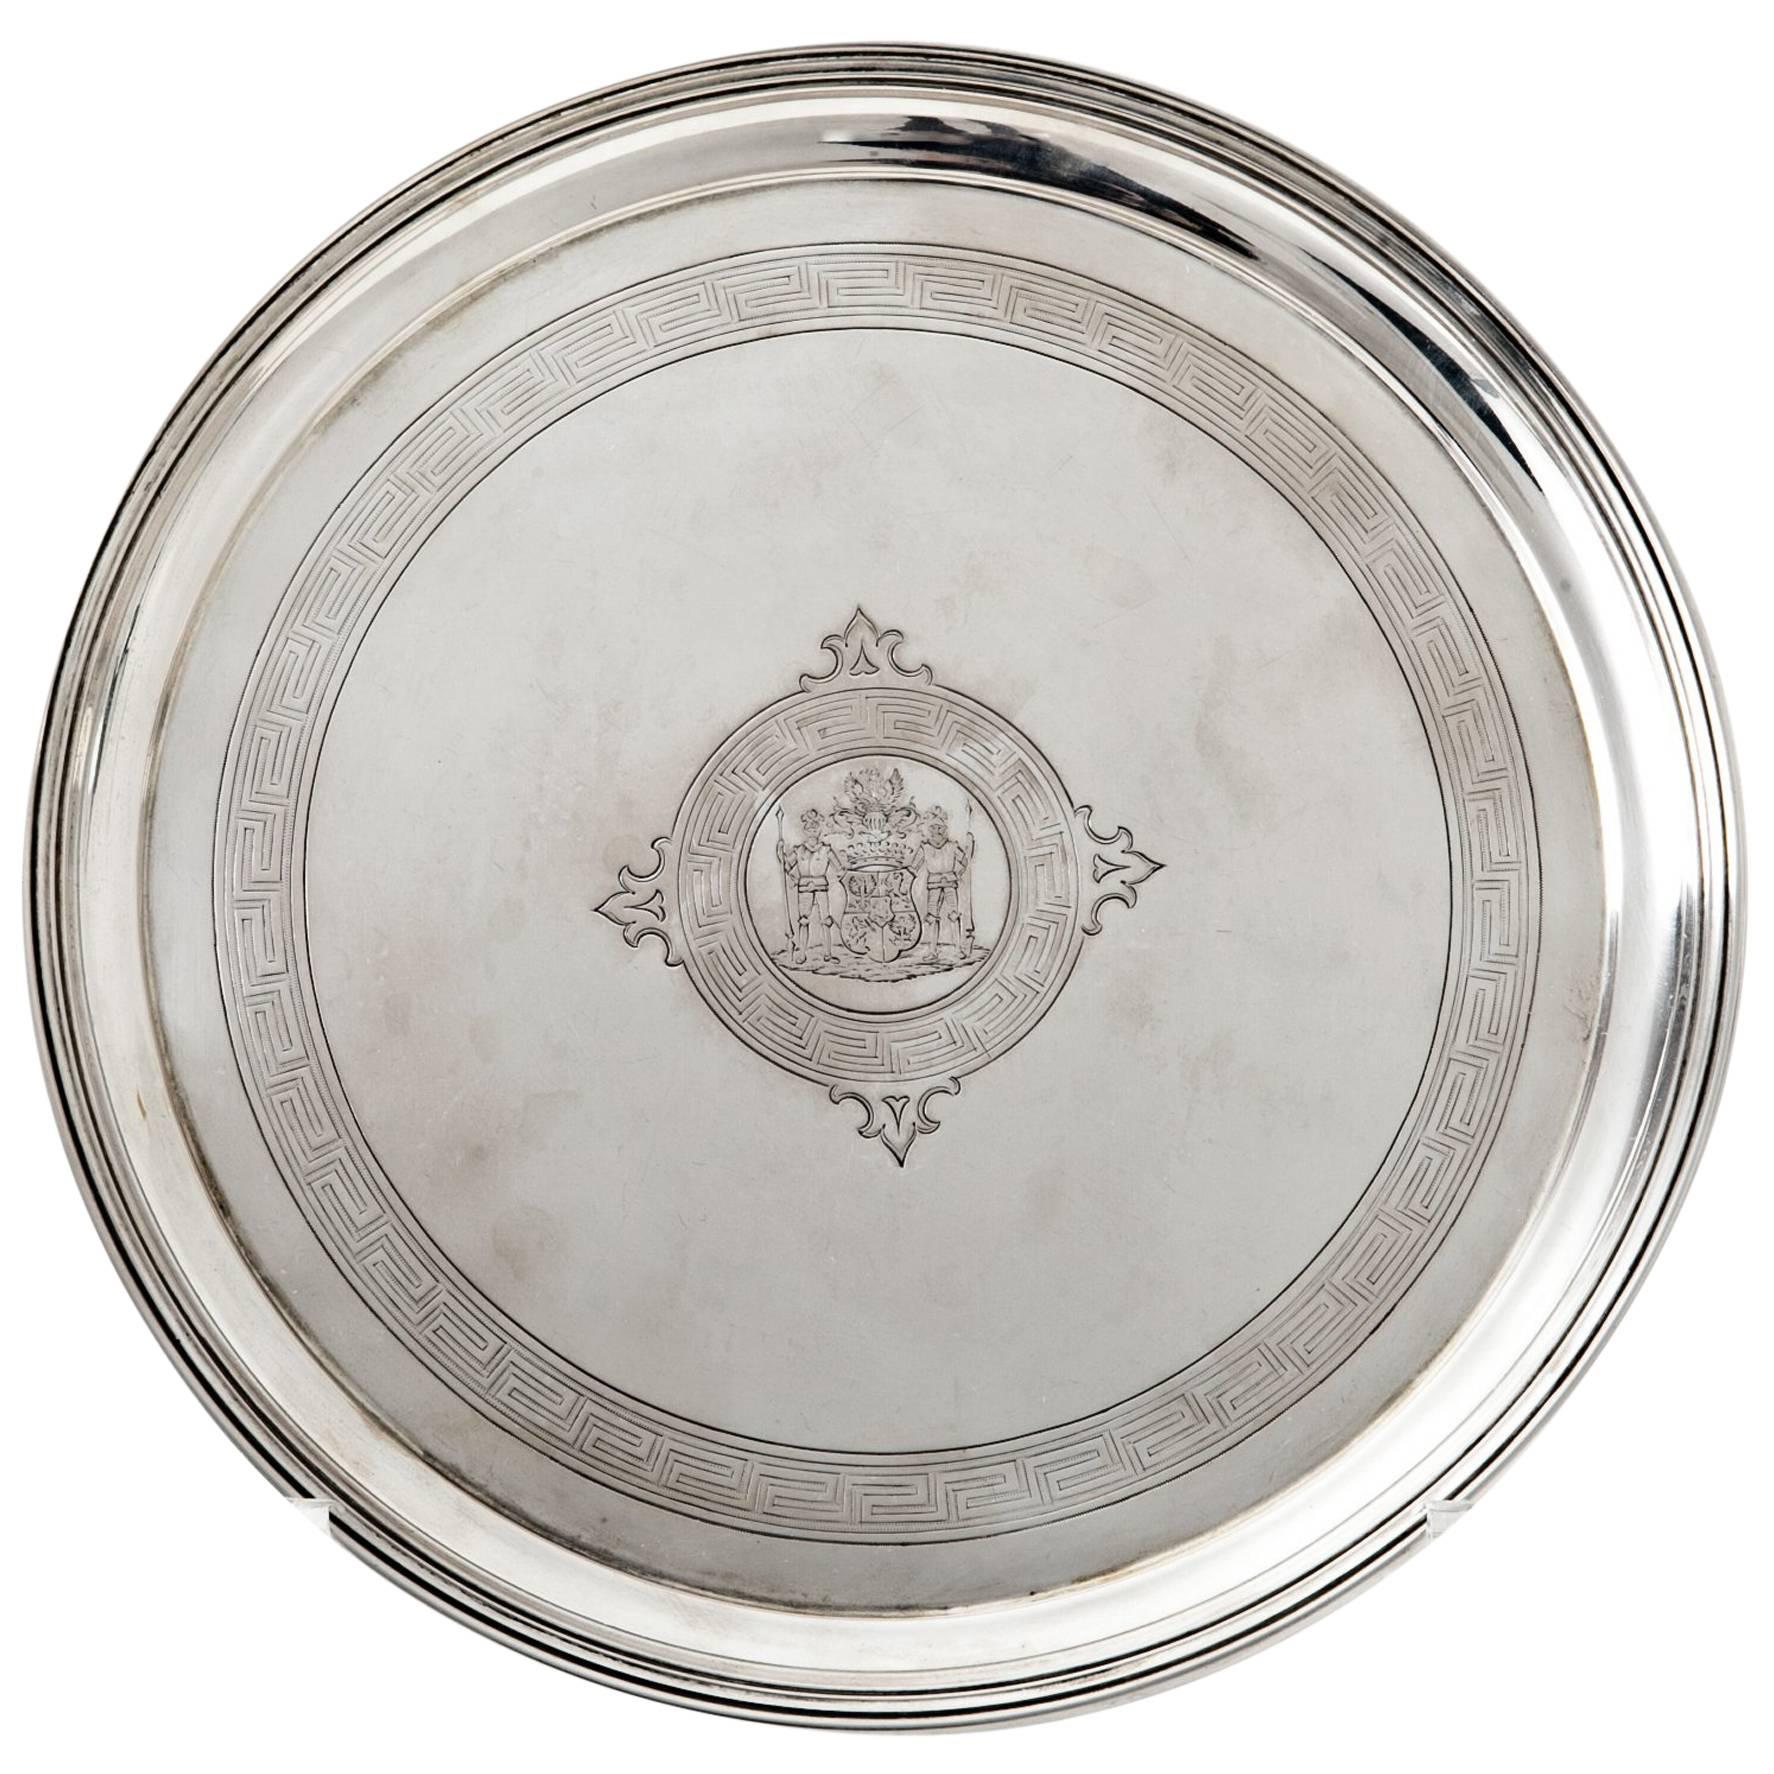 Silver Plate of the Westarp Family by Wilm Berlin, circa 1870